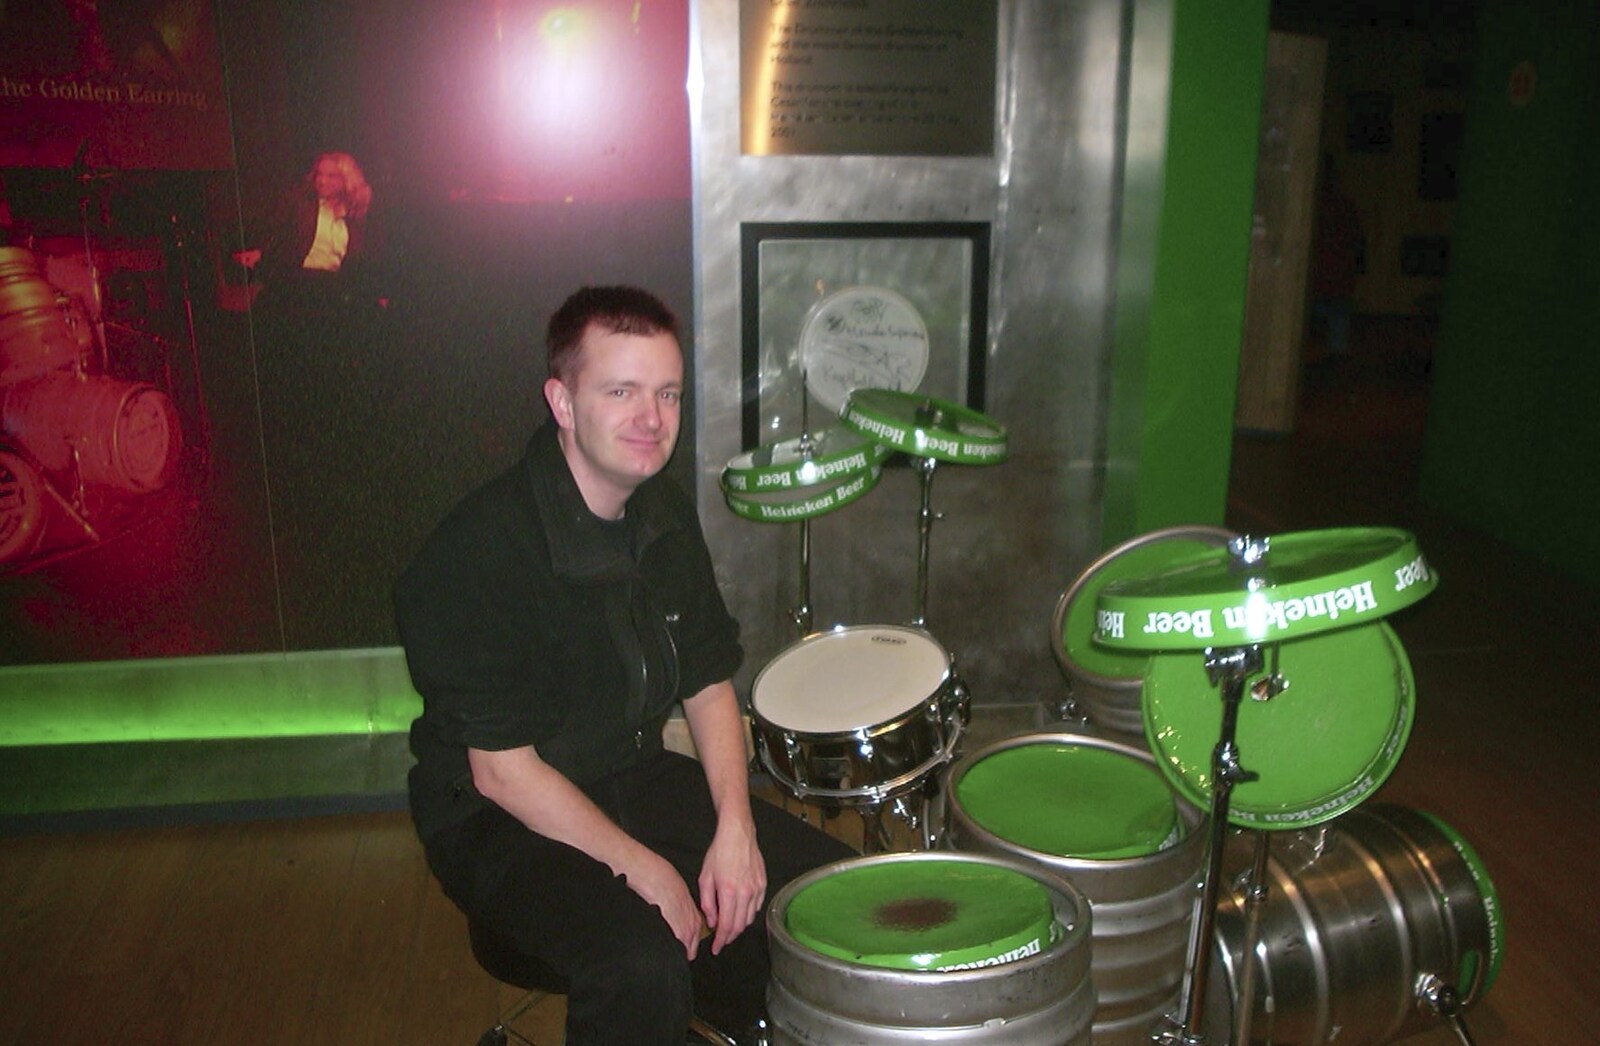 Nosher behind the drums from Anne Frank, Markets and Mikey-P's Stag Do, Amsterdam, Netherlands - 6th March 2004